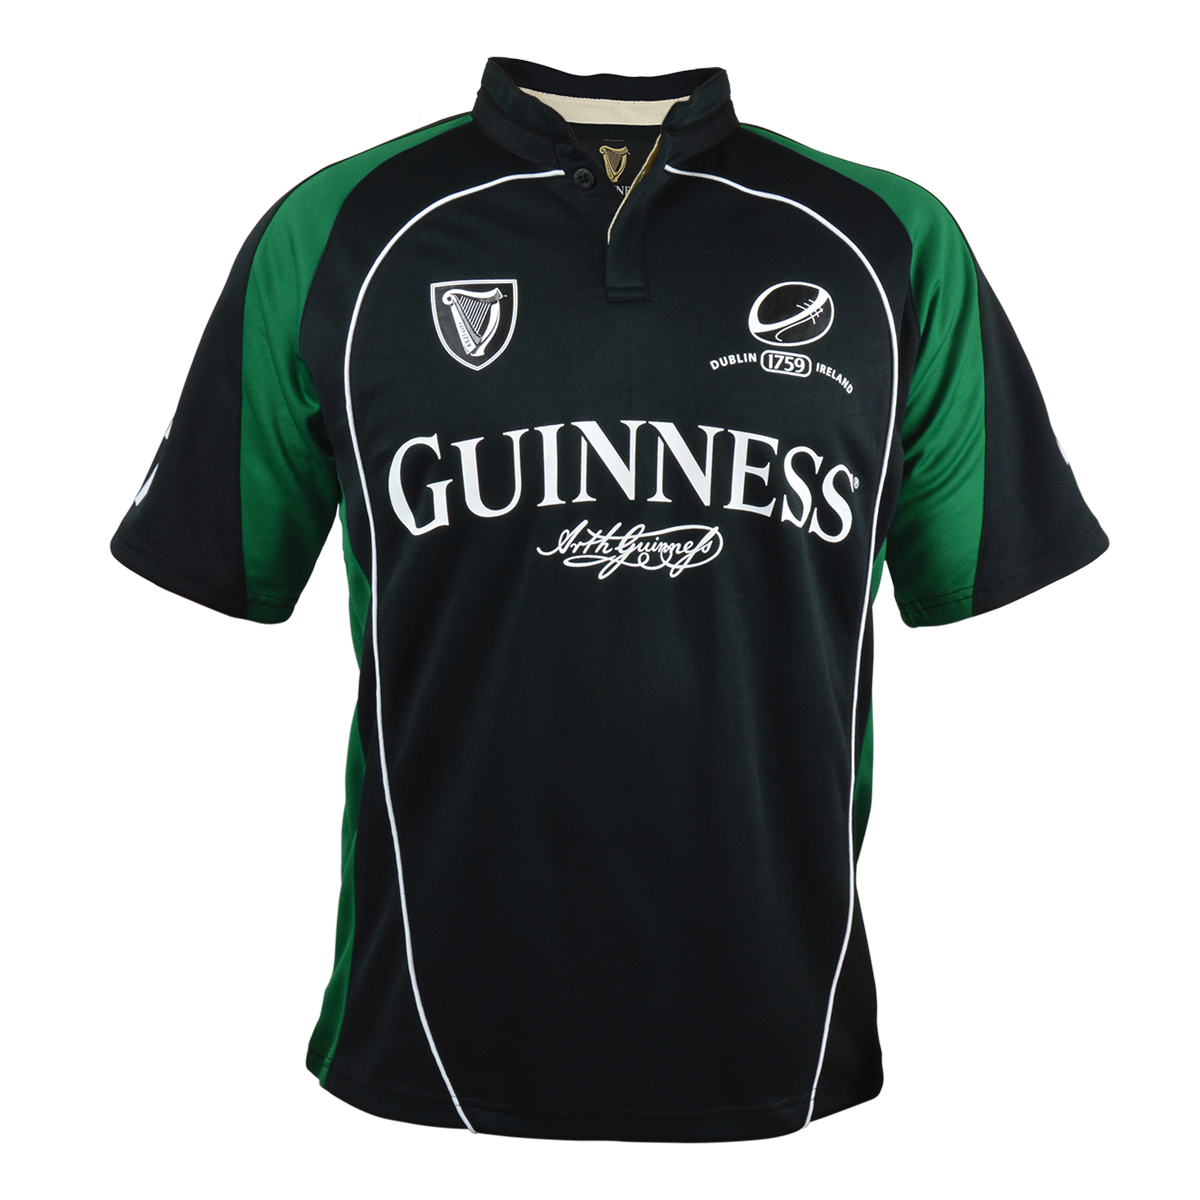 A Guinness Short Sleeve Performance Rugby Jersey.